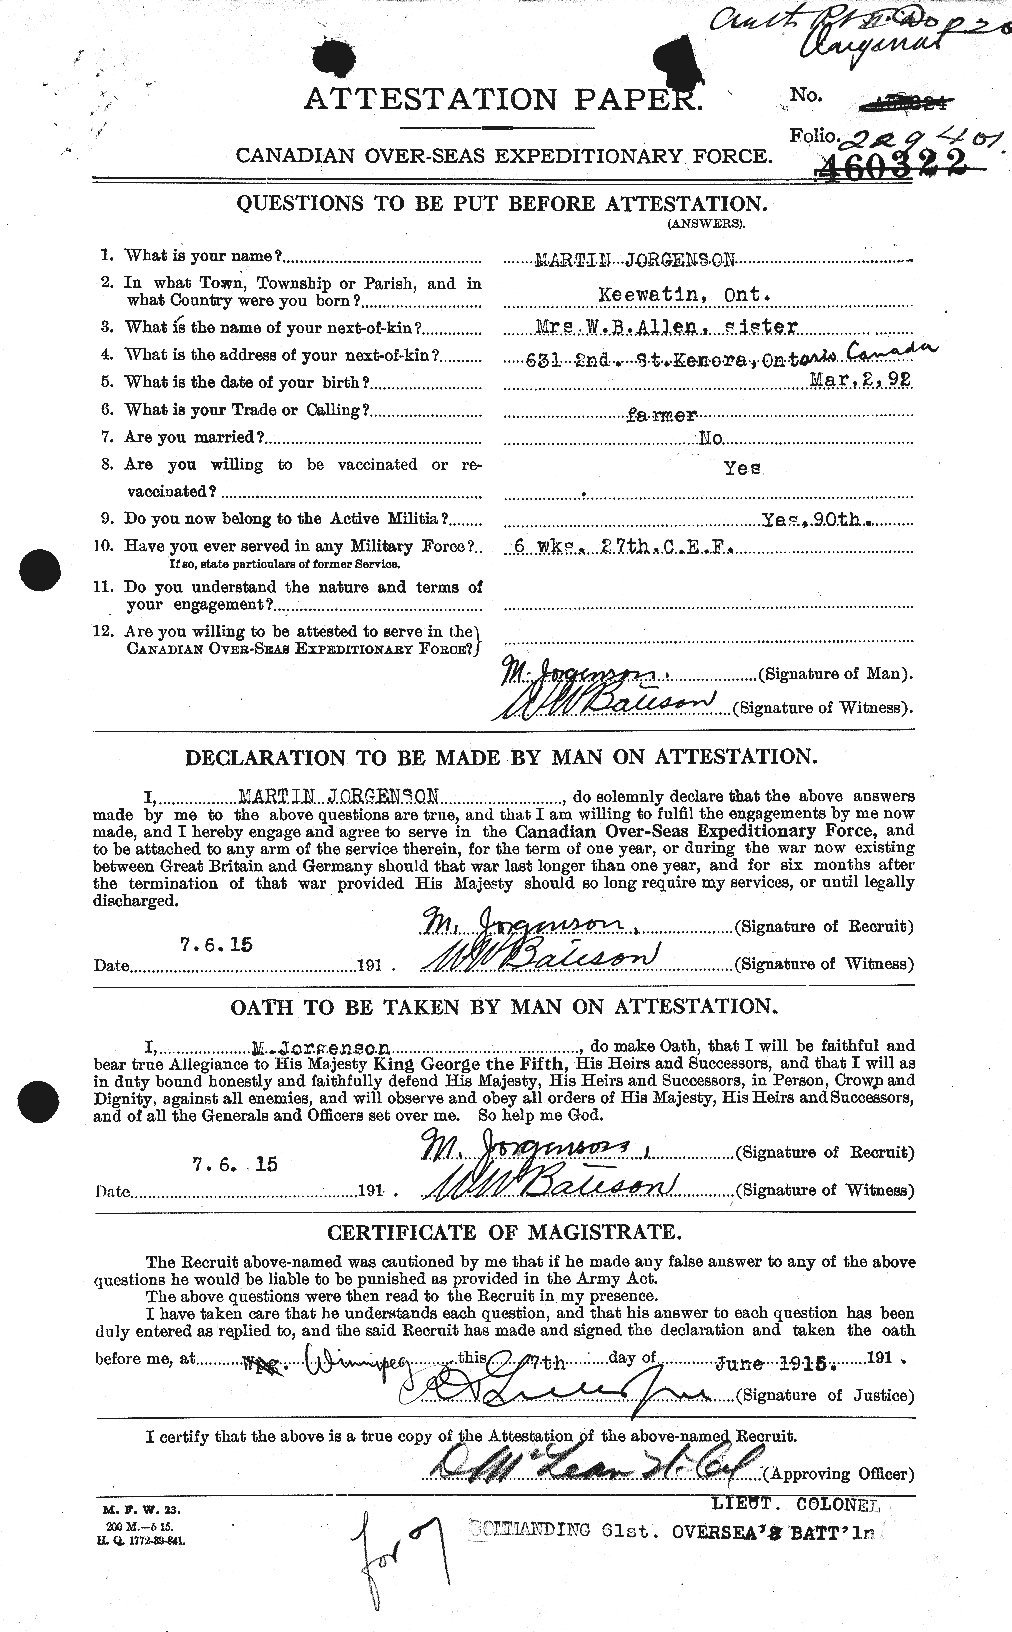 Personnel Records of the First World War - CEF 424567a